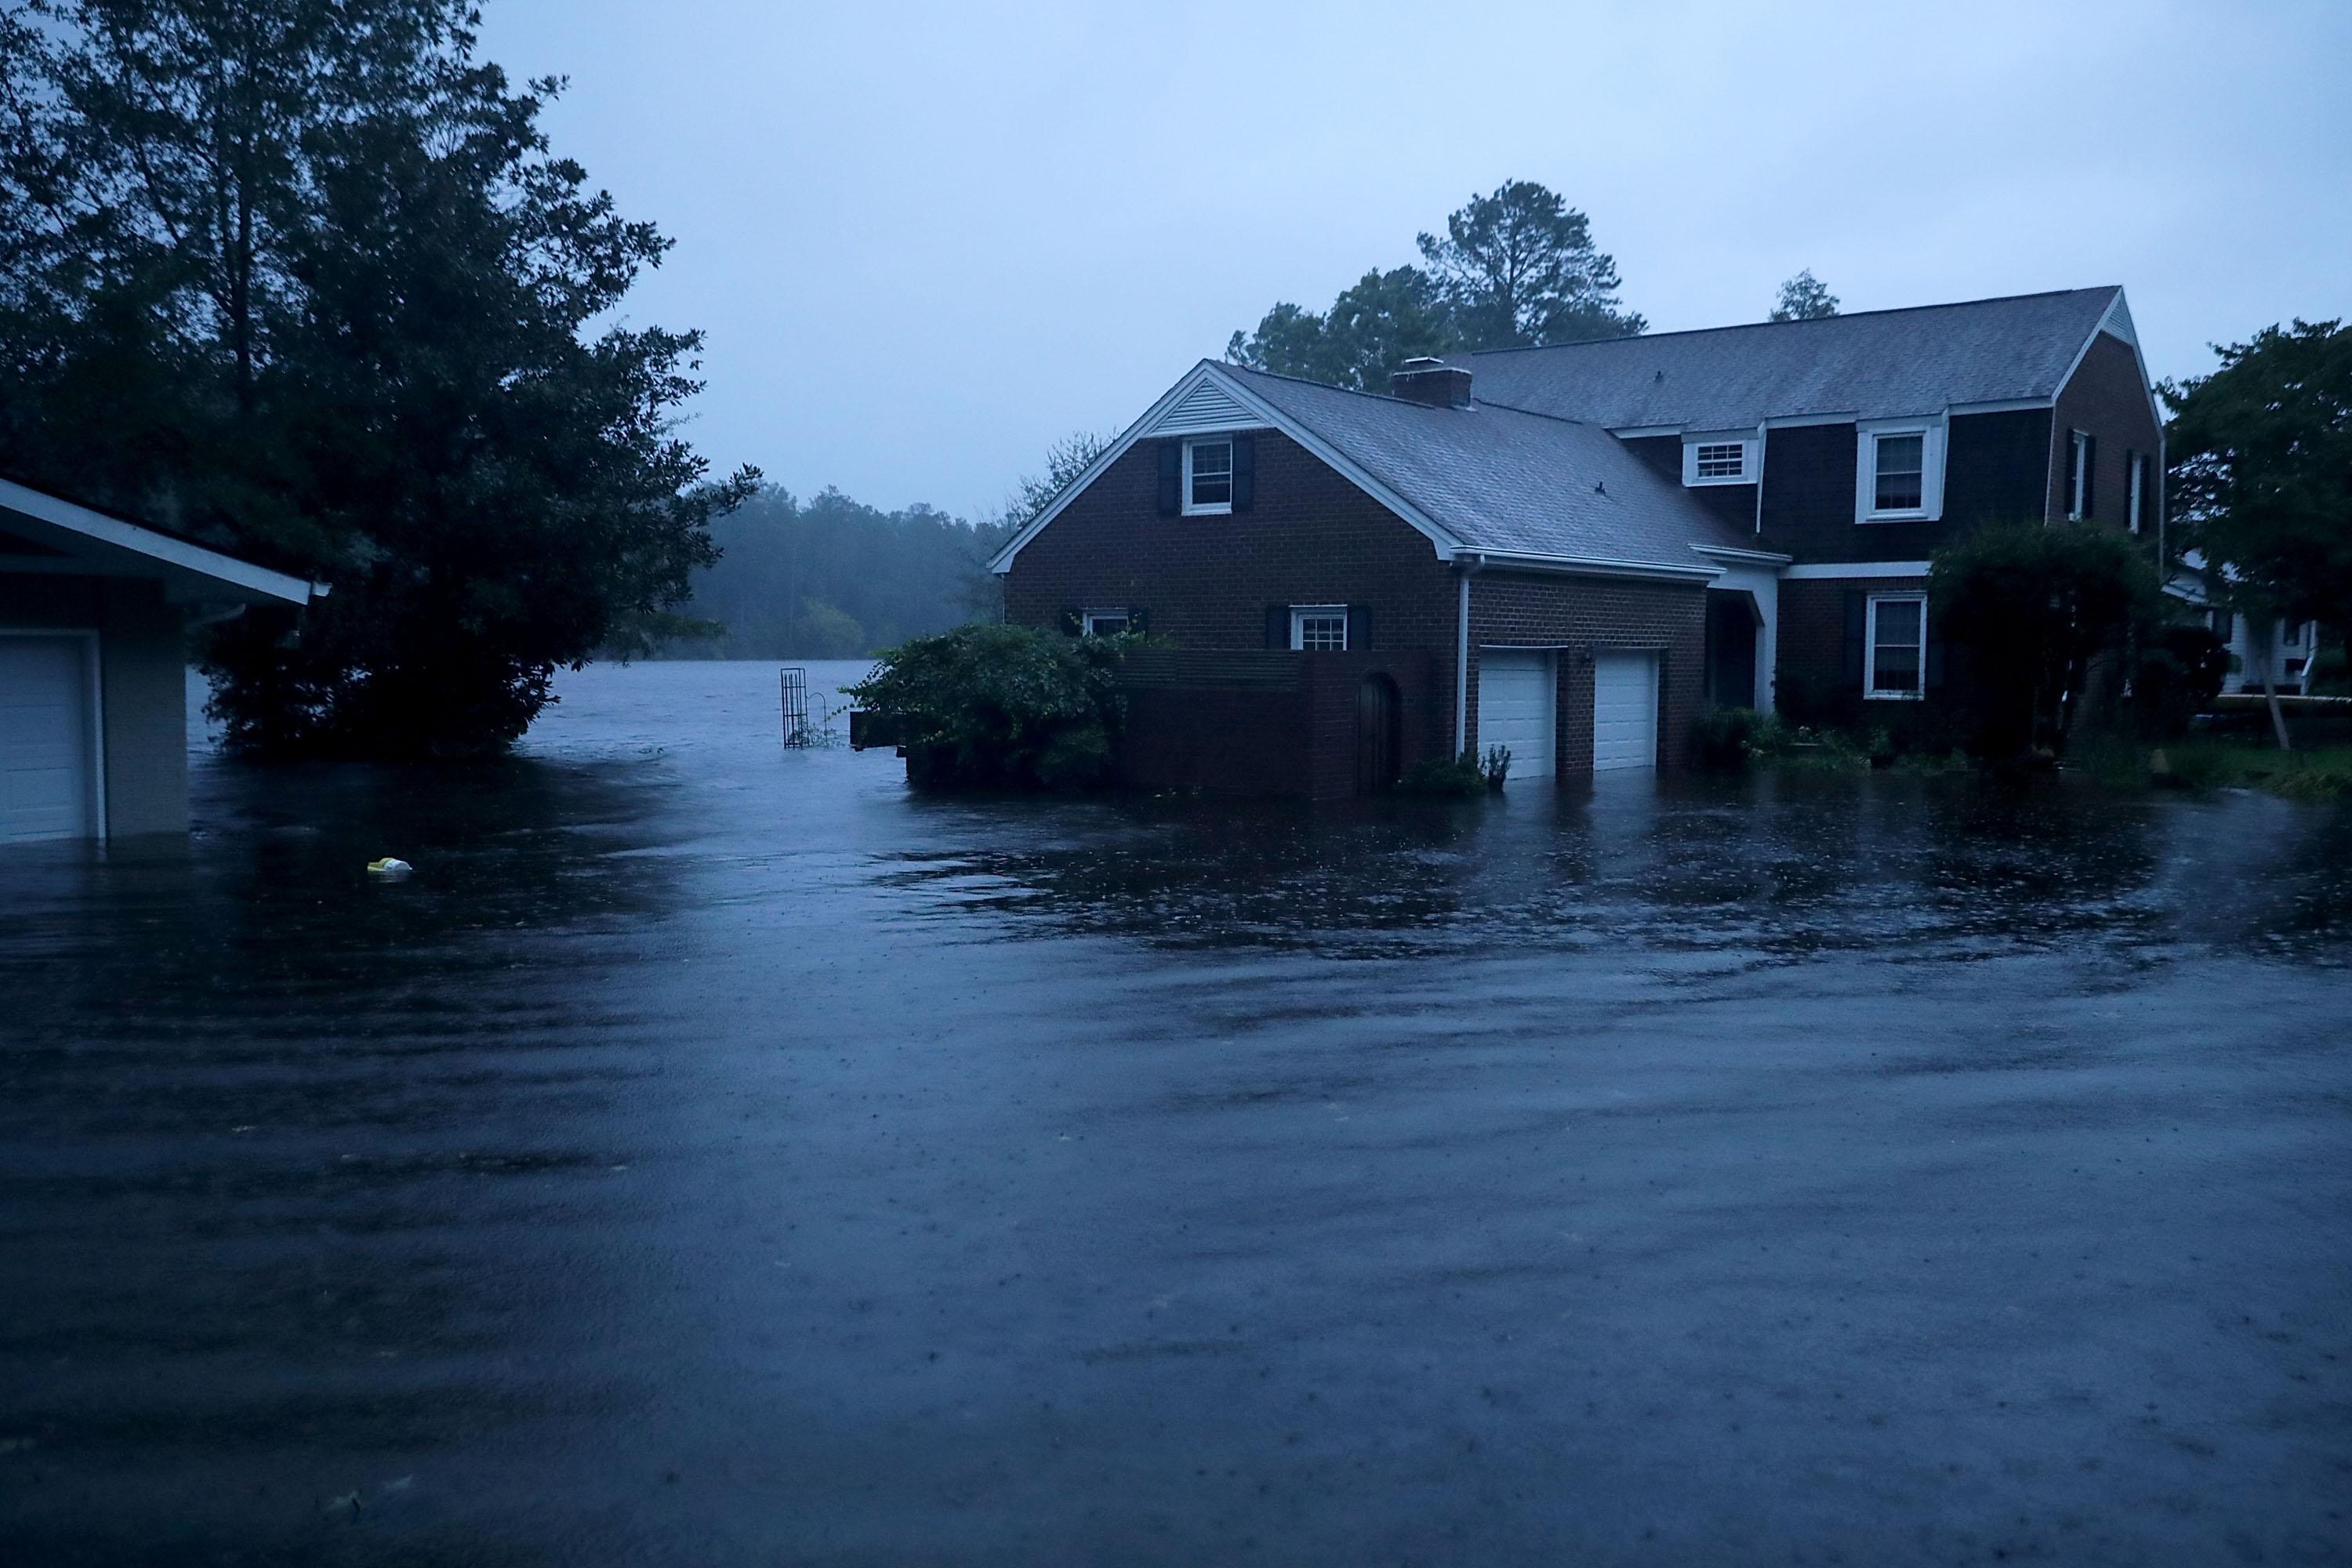 The Trent River (background) overflows its banks and floods a neighborhood during Hurricane Florence September 13, 2018 in River Bend, North Carolina. Some parts of River Bend and the neighboring New Bern could be flooded with a possible 9-foot storm surge as the Category 2 hurricane approaches the United States.  (Photo by Chip Somodevilla/Getty Images)